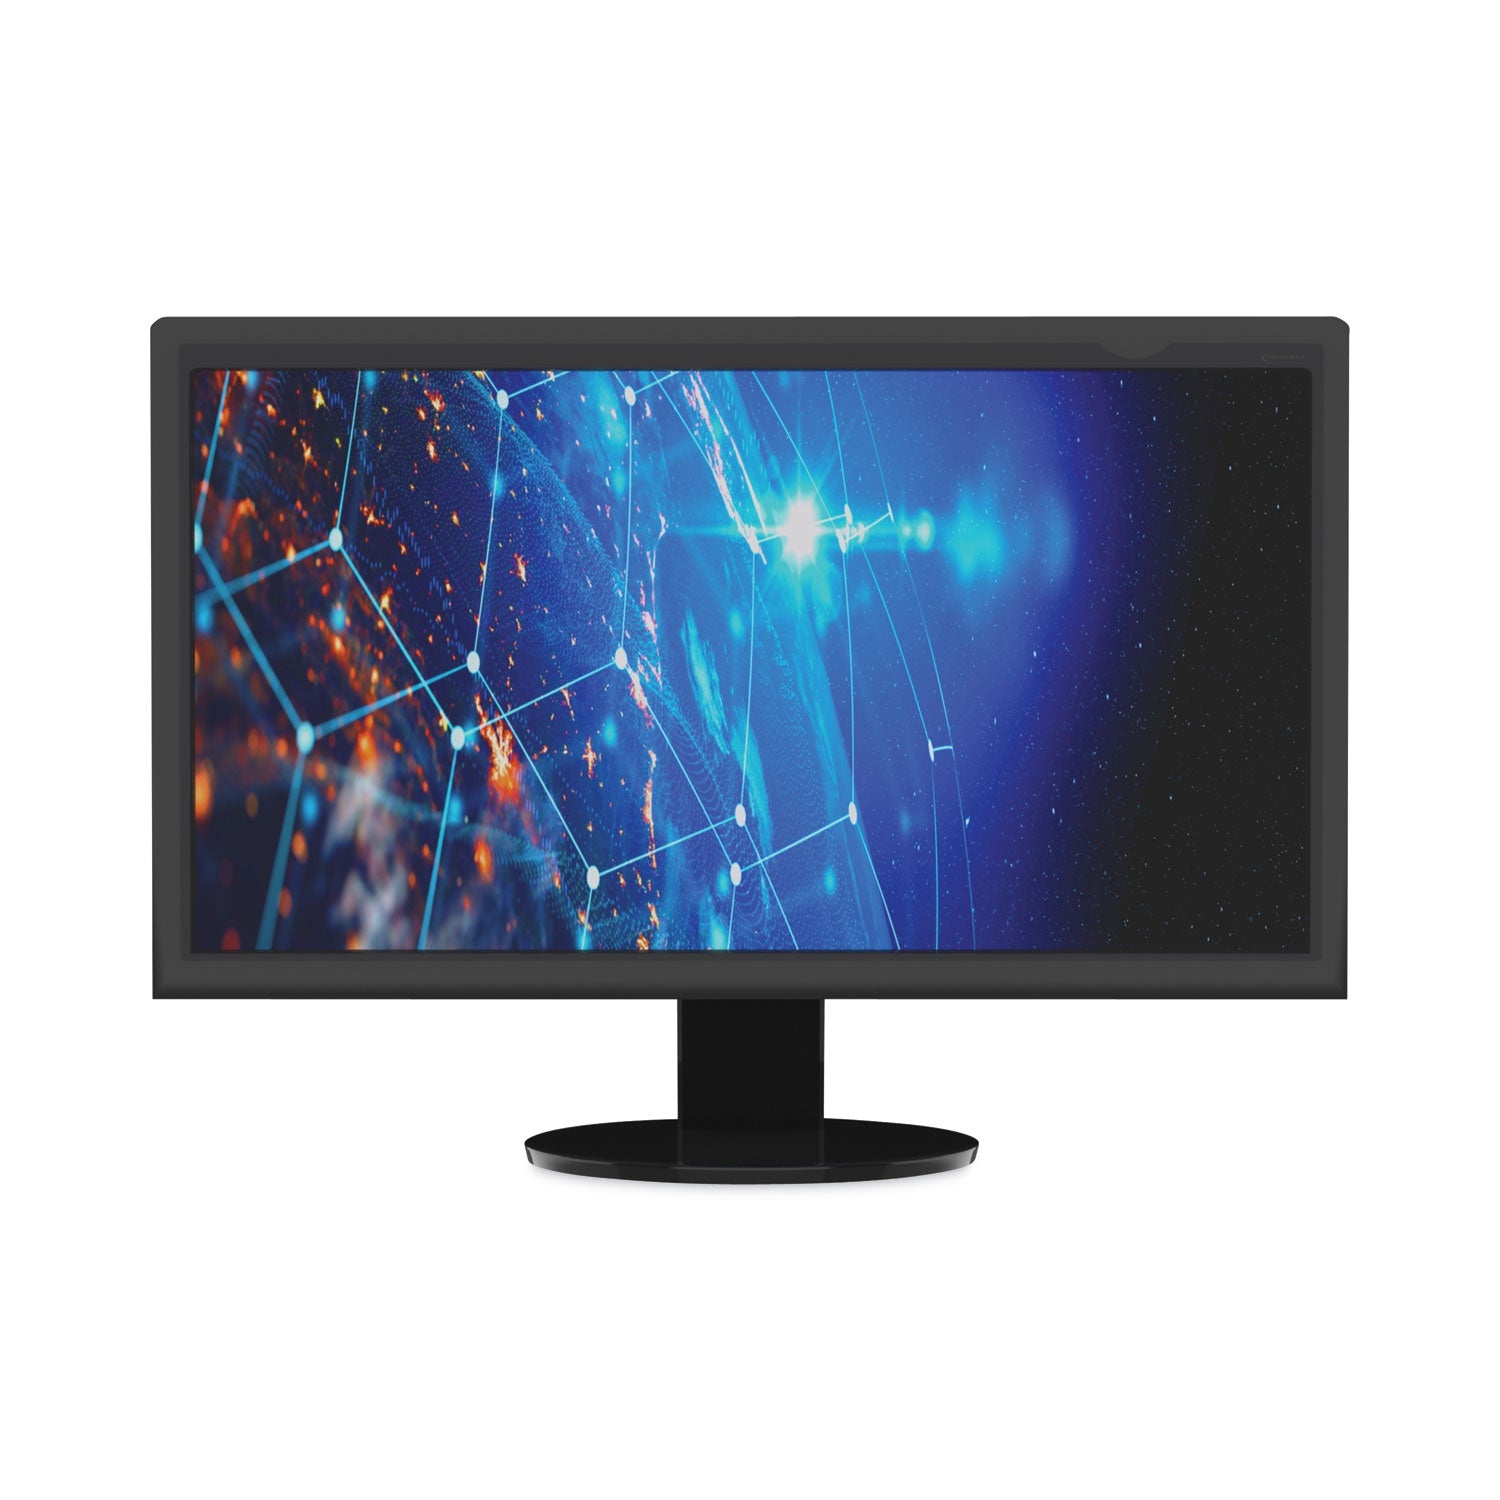 blackout-privacy-monitor-filter-for-195-widescreen-flat-panel-monitor-169-aspect-ratio_ivrblf195w - 4